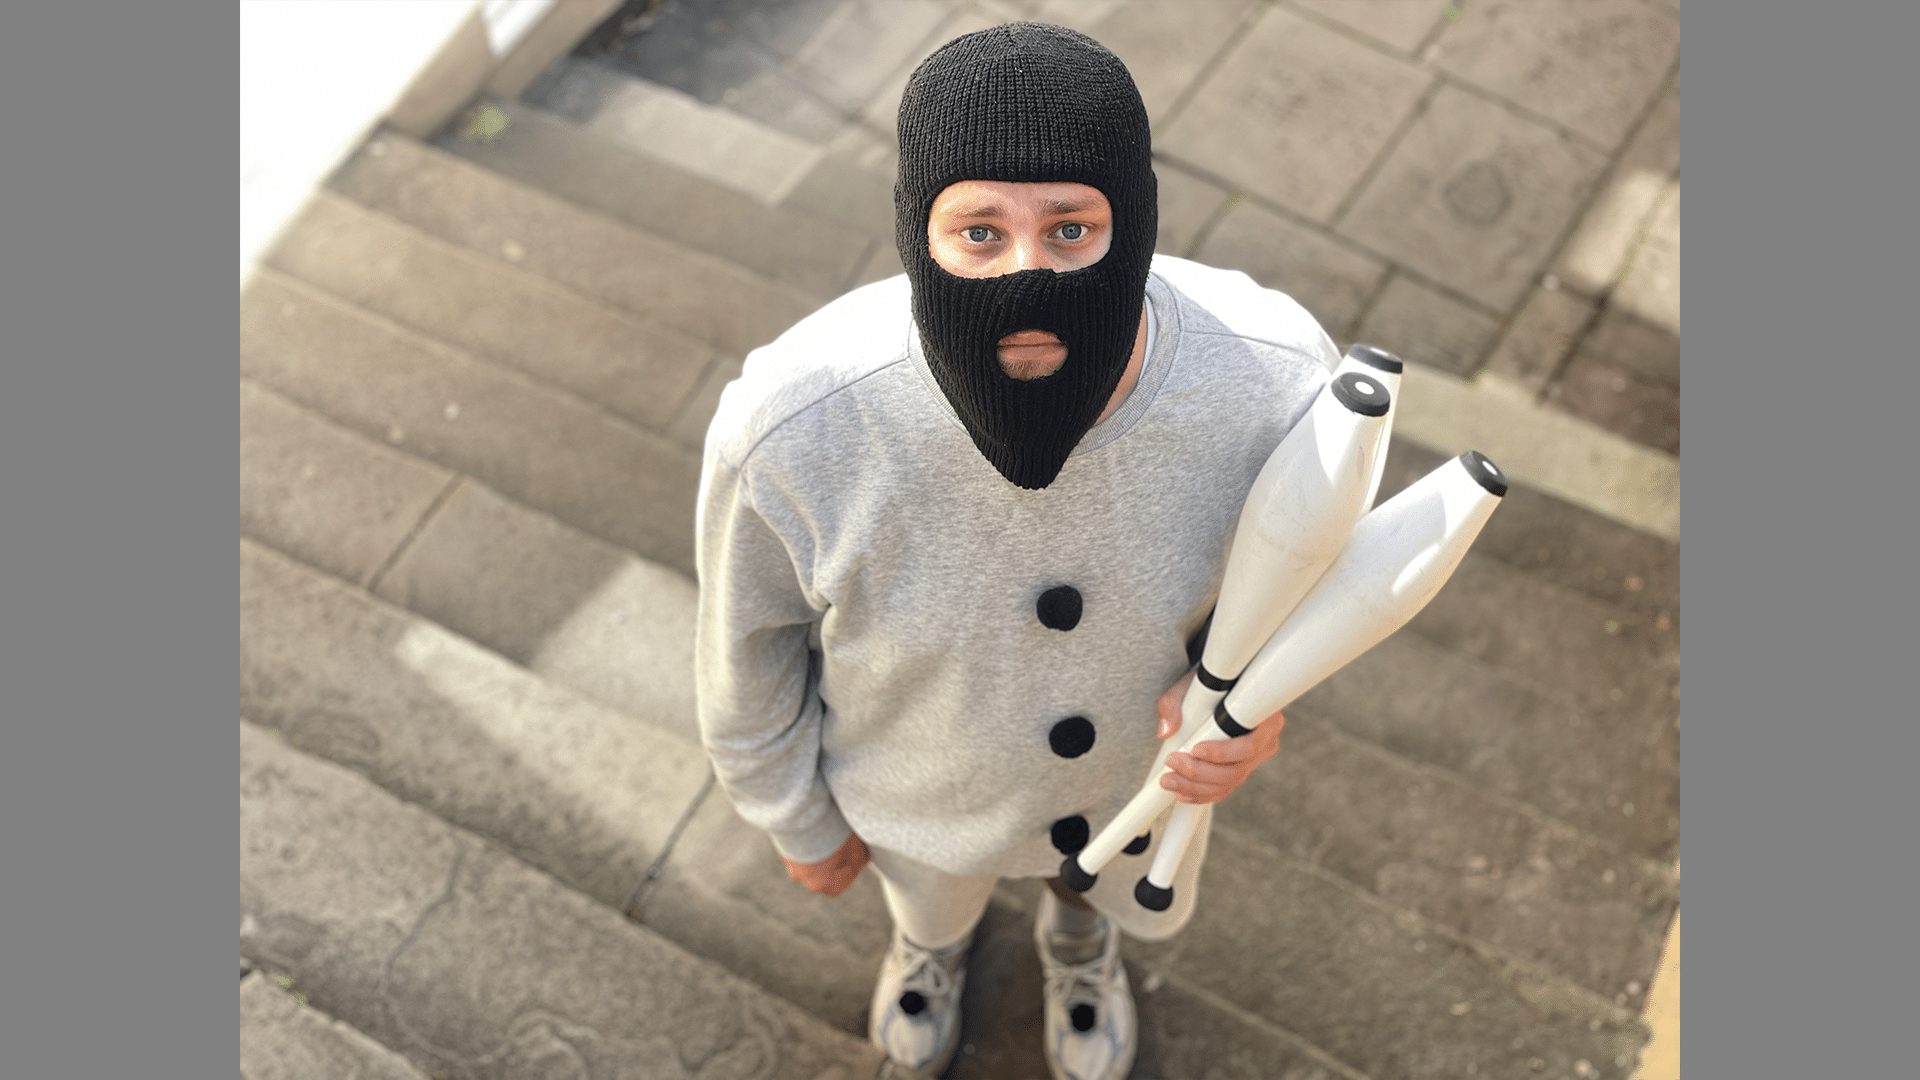 A performer in a balaclava looks up at the camera, they are holding juggling clubs.